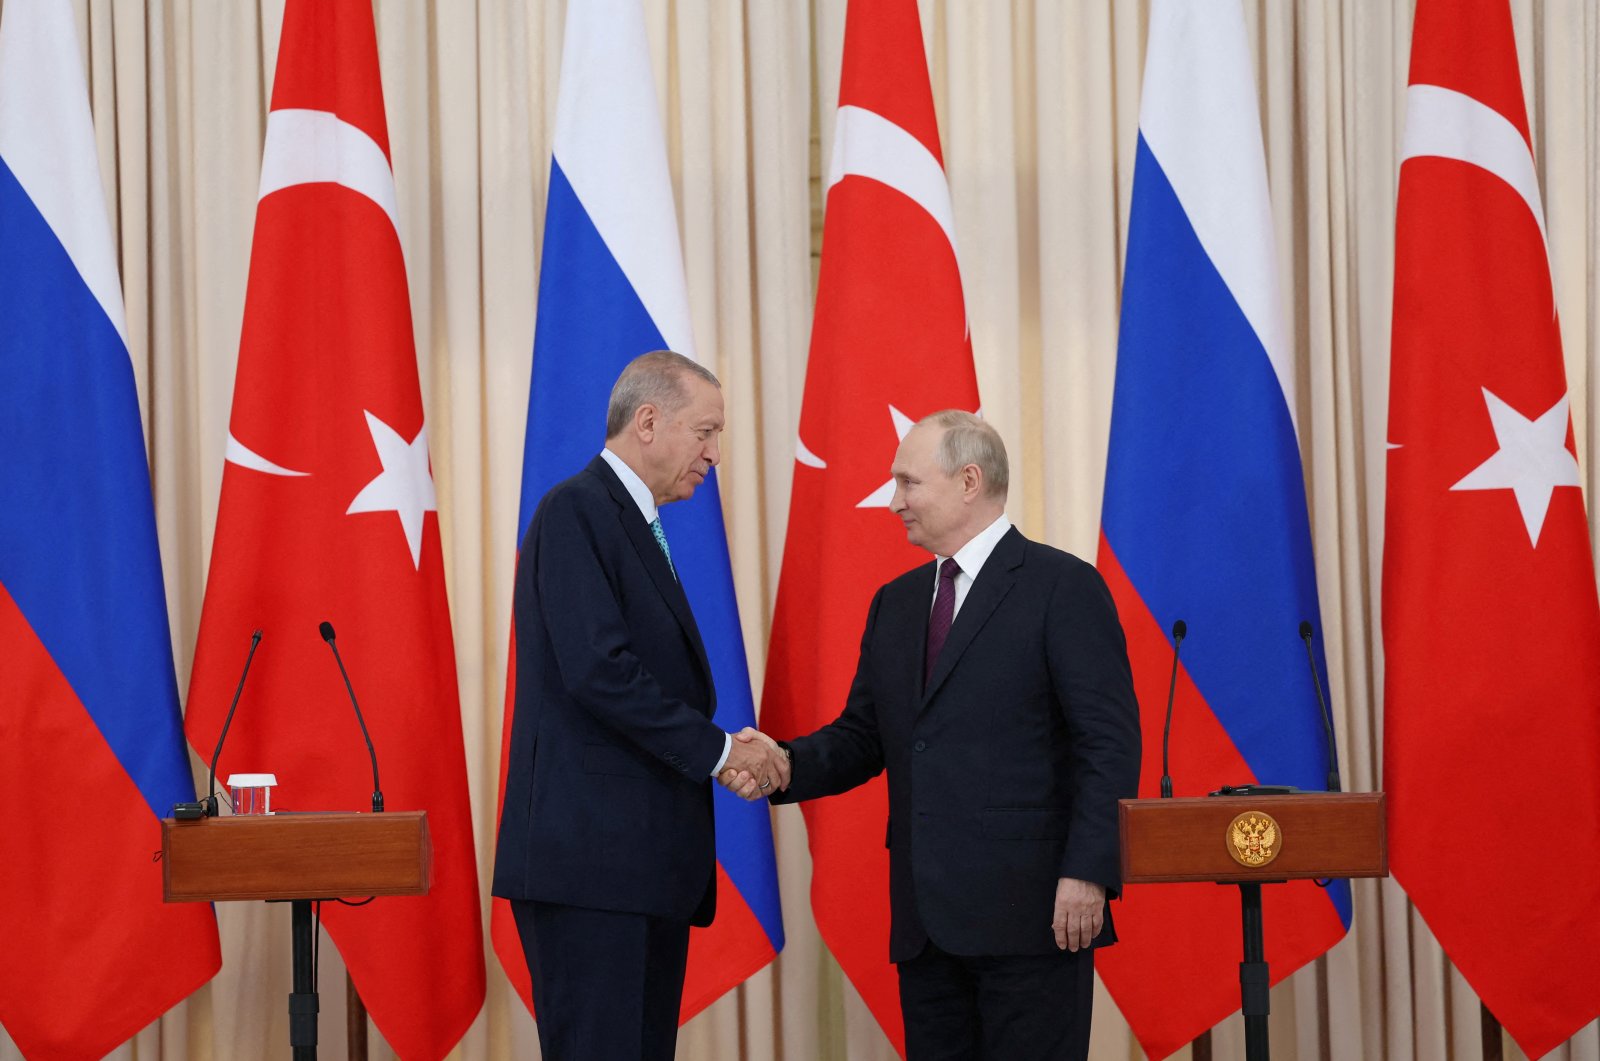 President Recep Tayyip Erdoğan shakes hands with his Russian counterpart Vladimir Putin during a press conference in Sochi, Russia Sept. 4, 2023. (Reuters Photo)